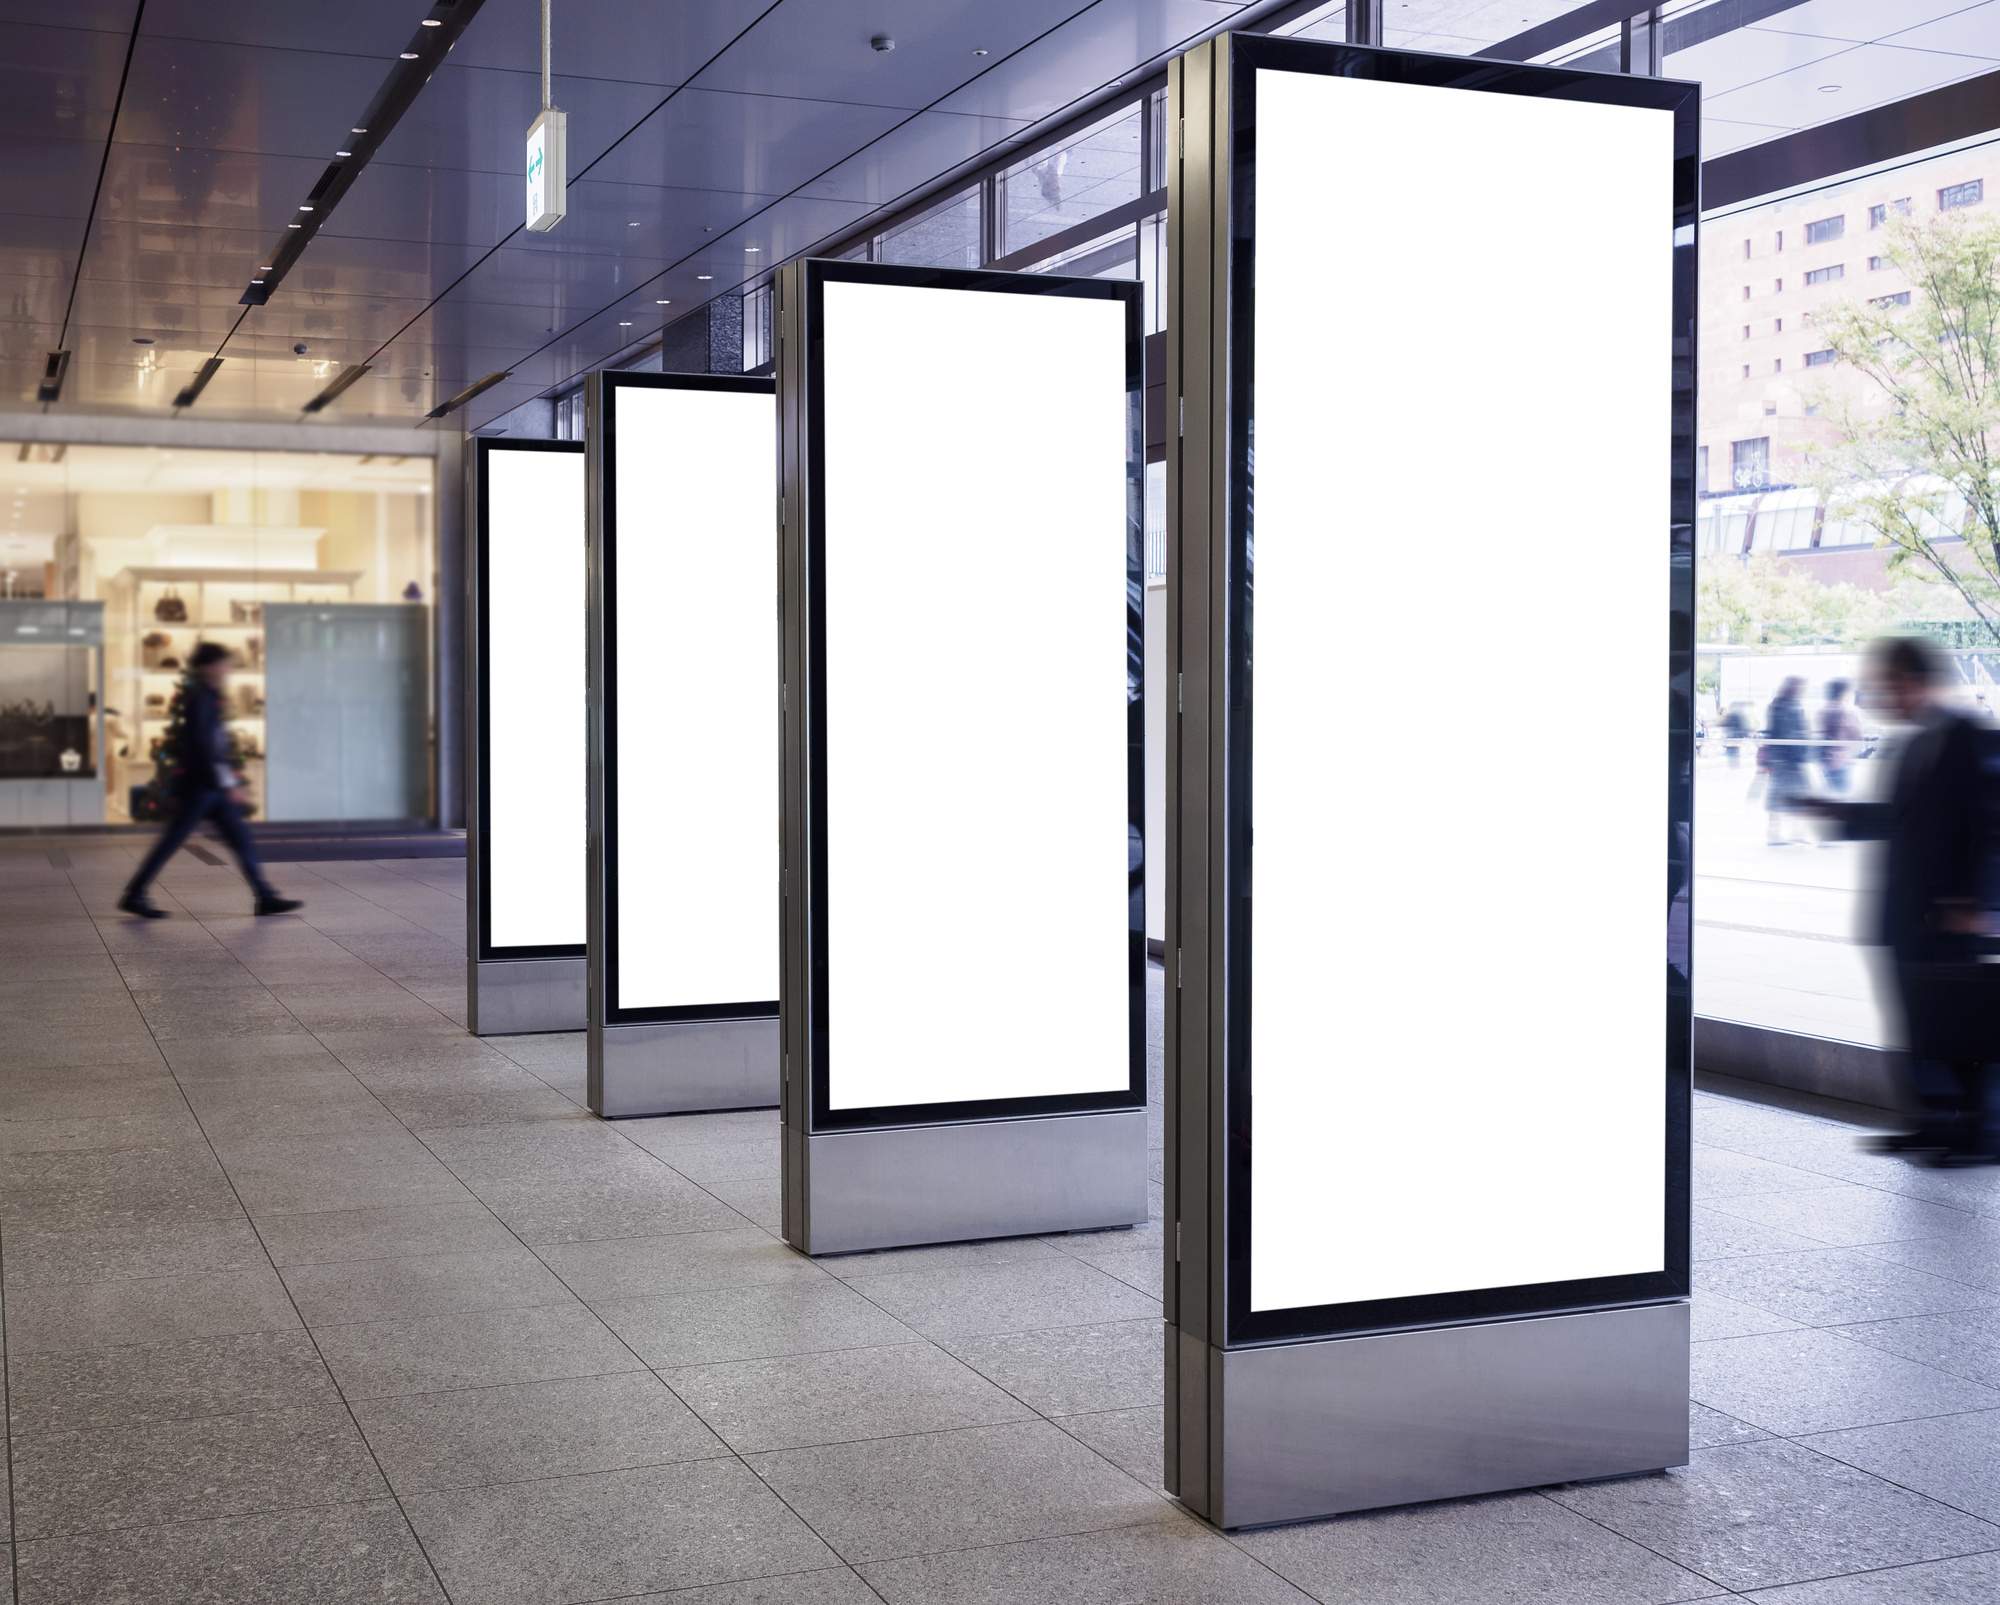 How to Choose the Best Digital Signage Company